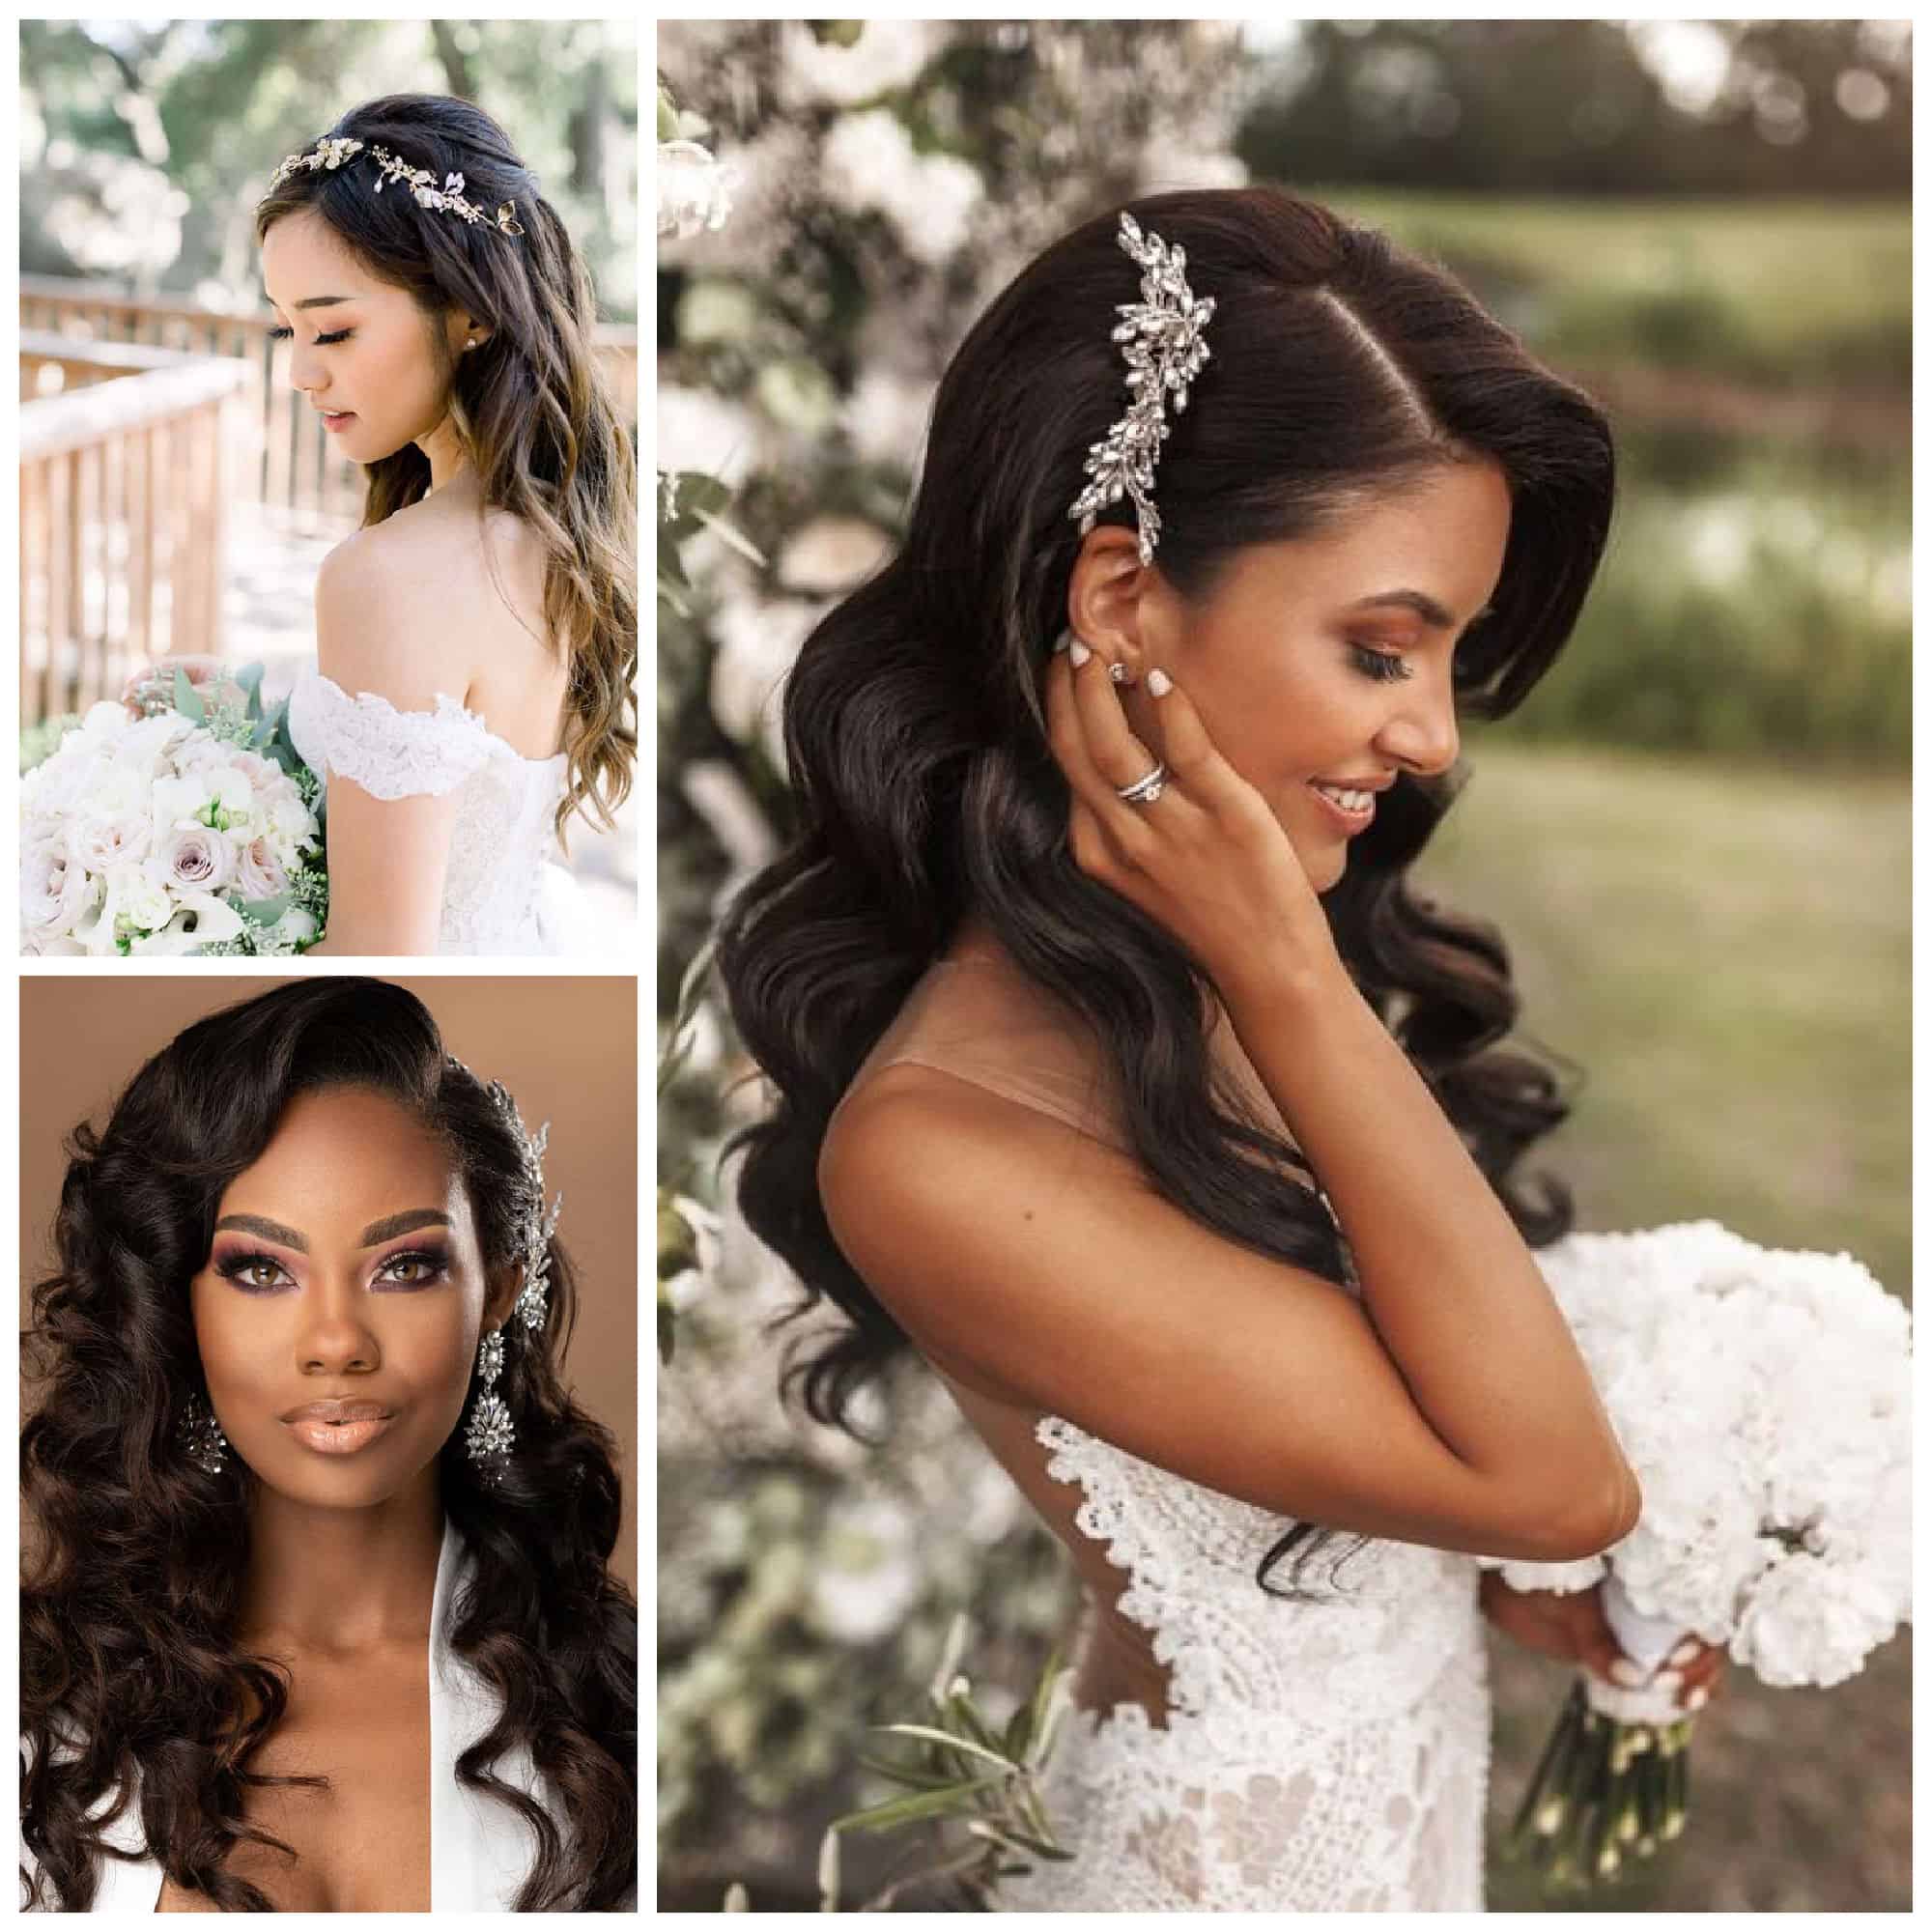 Unique Hairstyles to Complement Your Wedding Dress